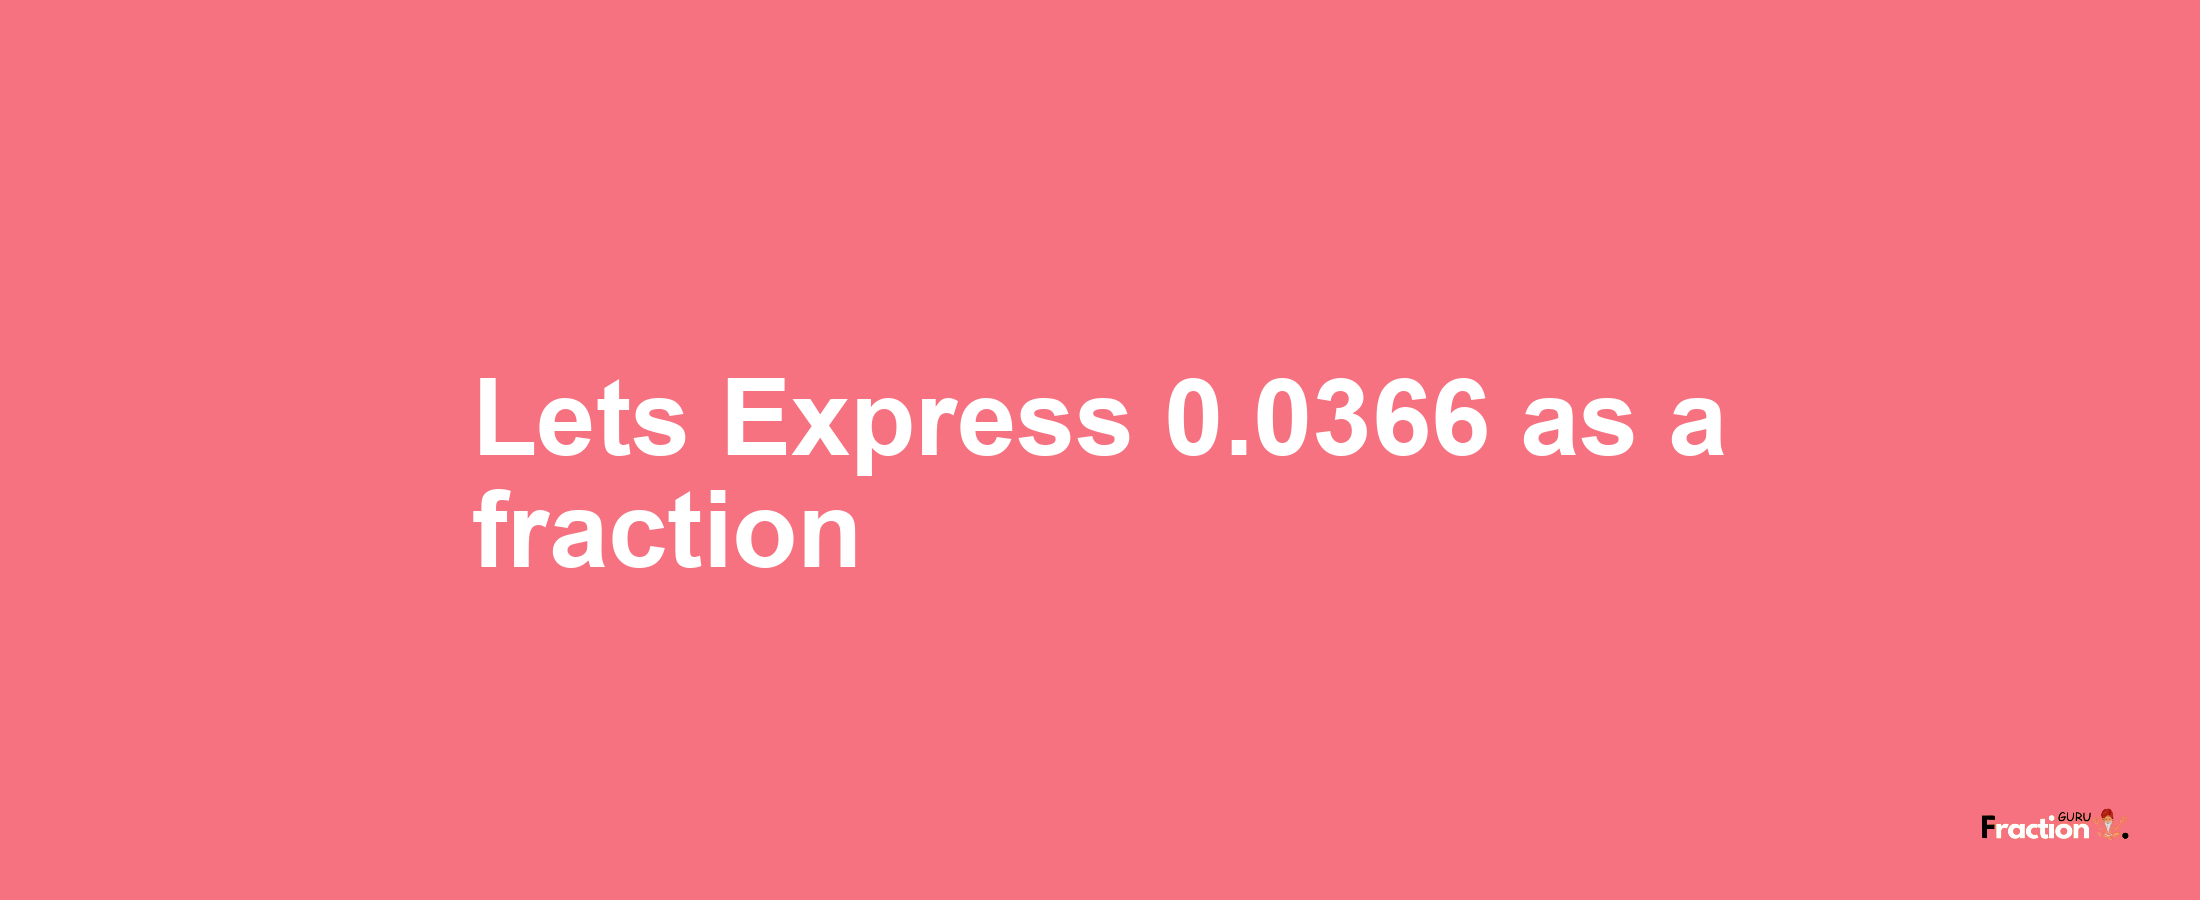 Lets Express 0.0366 as afraction